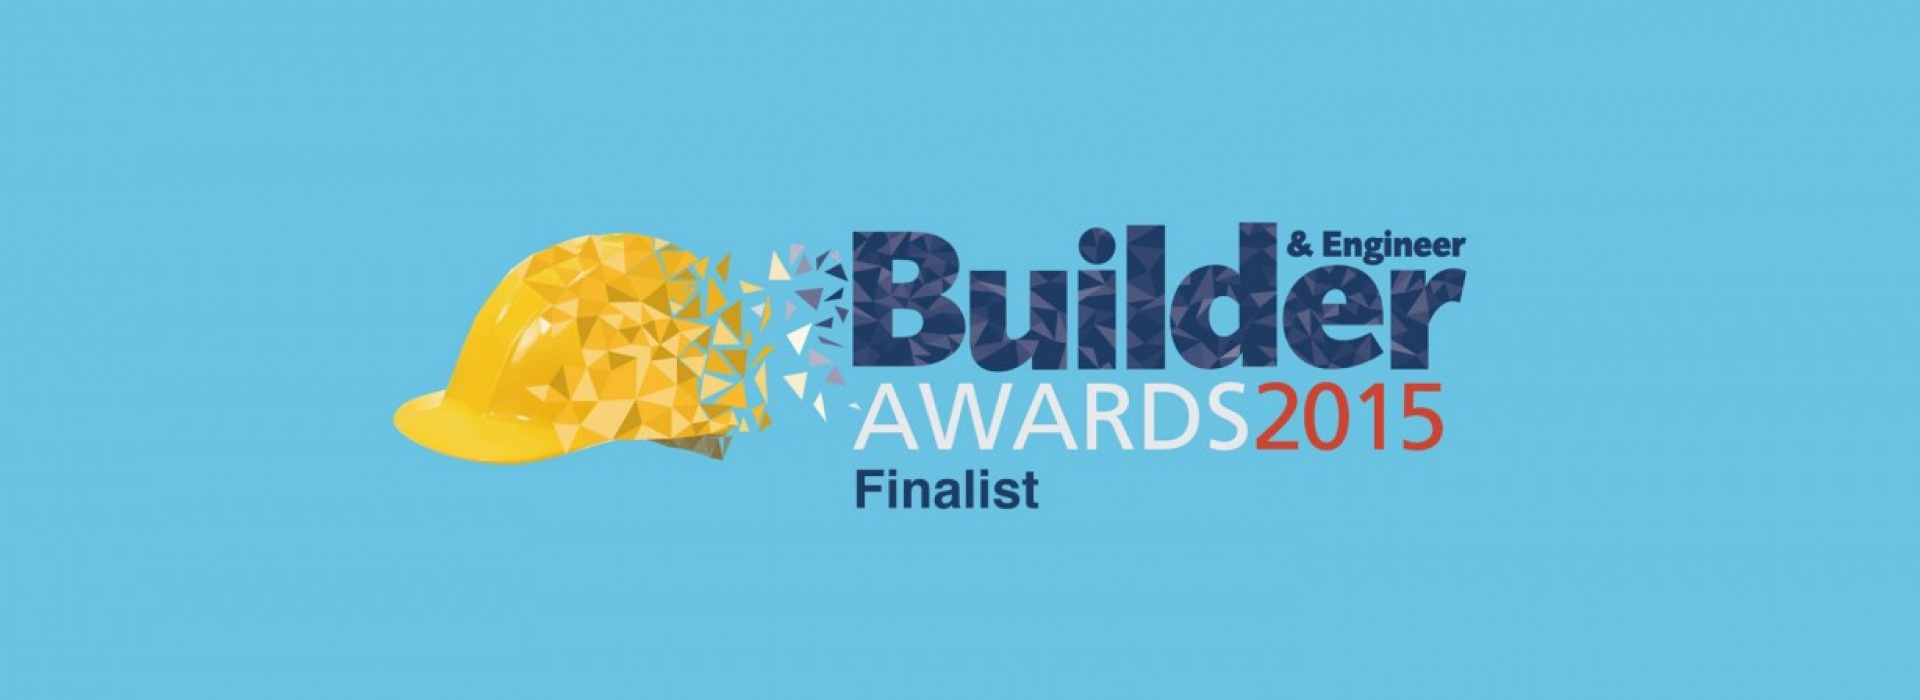 Taziker Industrial makes the shortlist in the builder & engineer awards